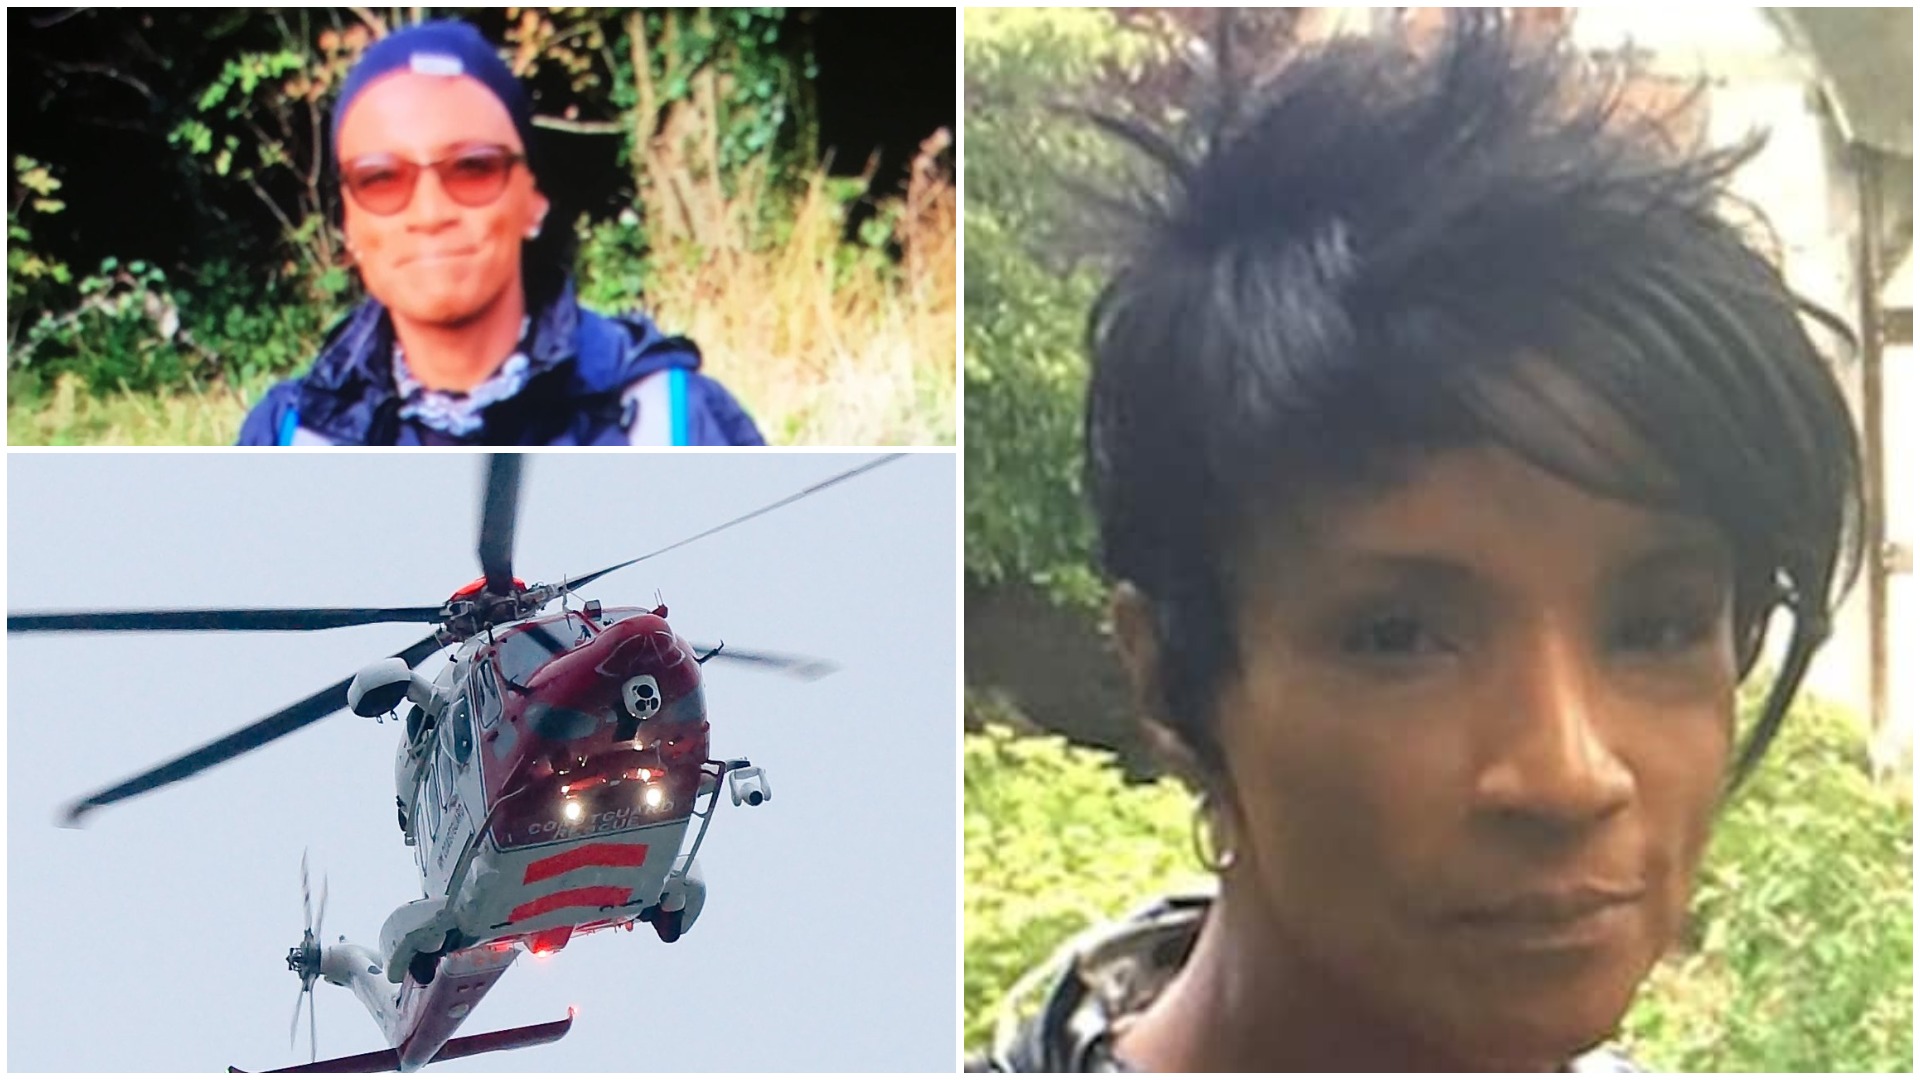 Coastguard helicopter joins search for missing Brighton woman - police say they are VERY concerned